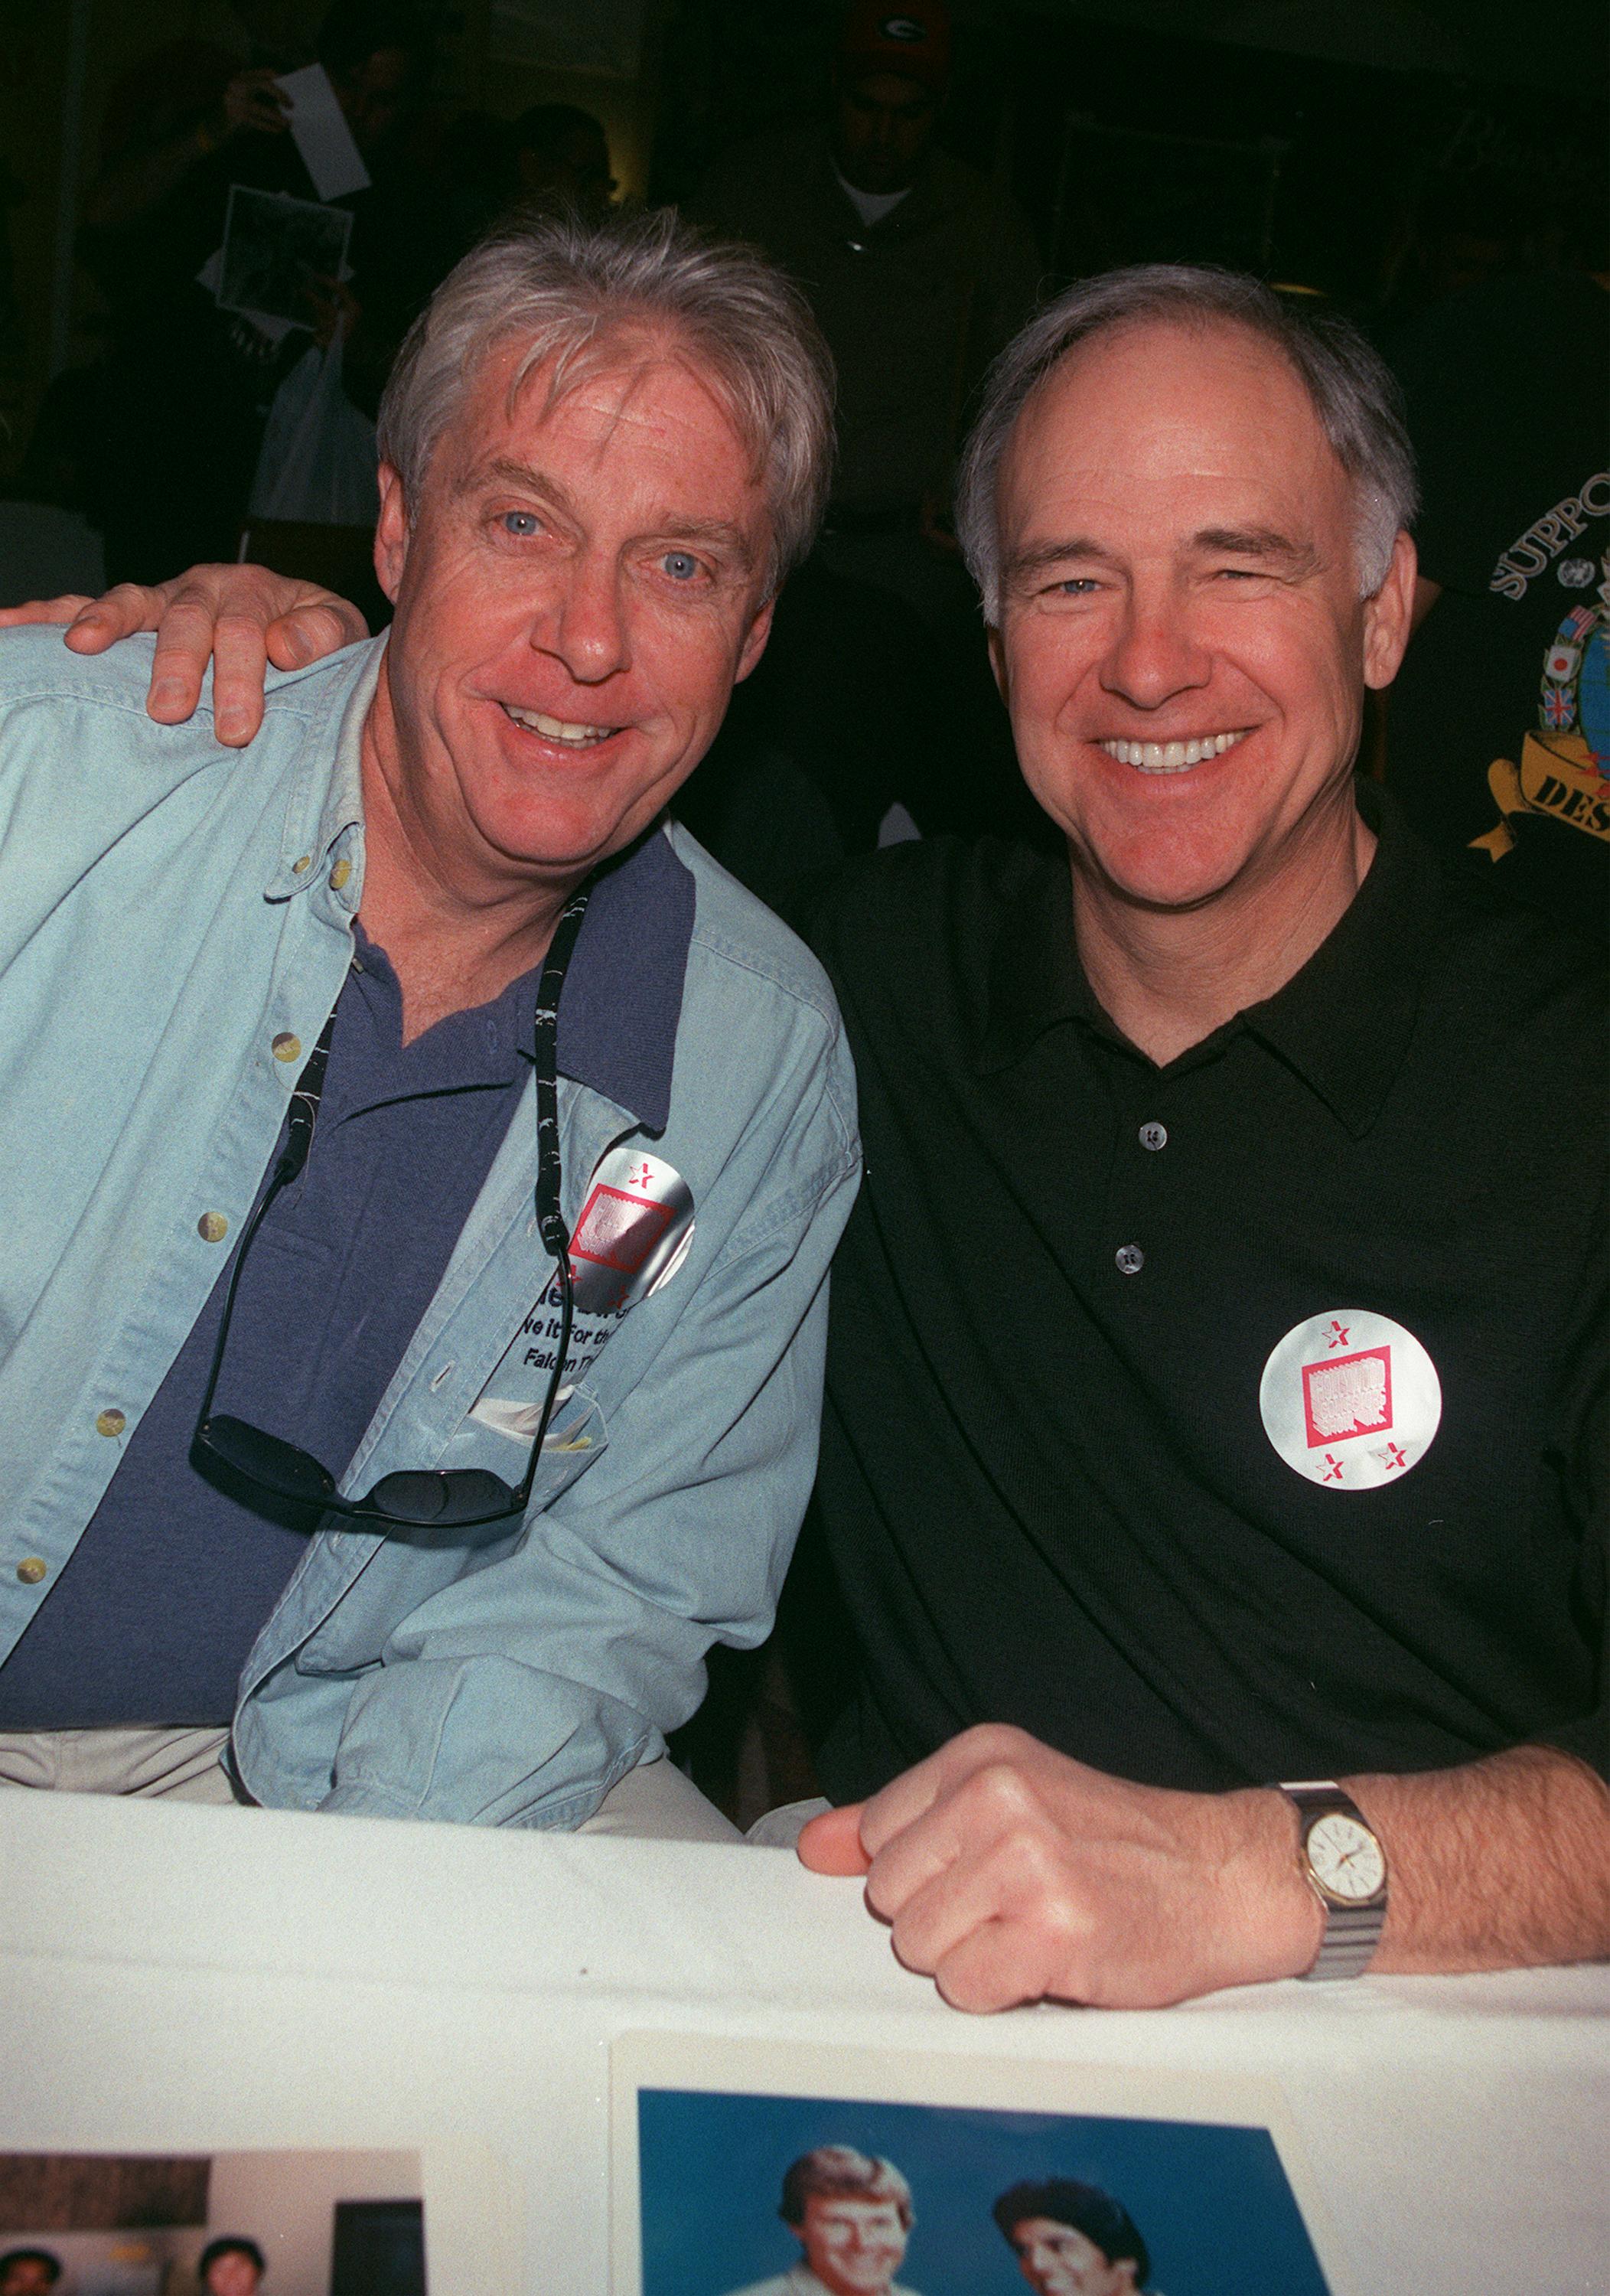 Paul Linke and Robert Pine, former "CHiPs" actors, pose at the Hollywood Collectors and Celebrity Show on January 20, 2001, in North Hollywood, California | Source: Getty Images